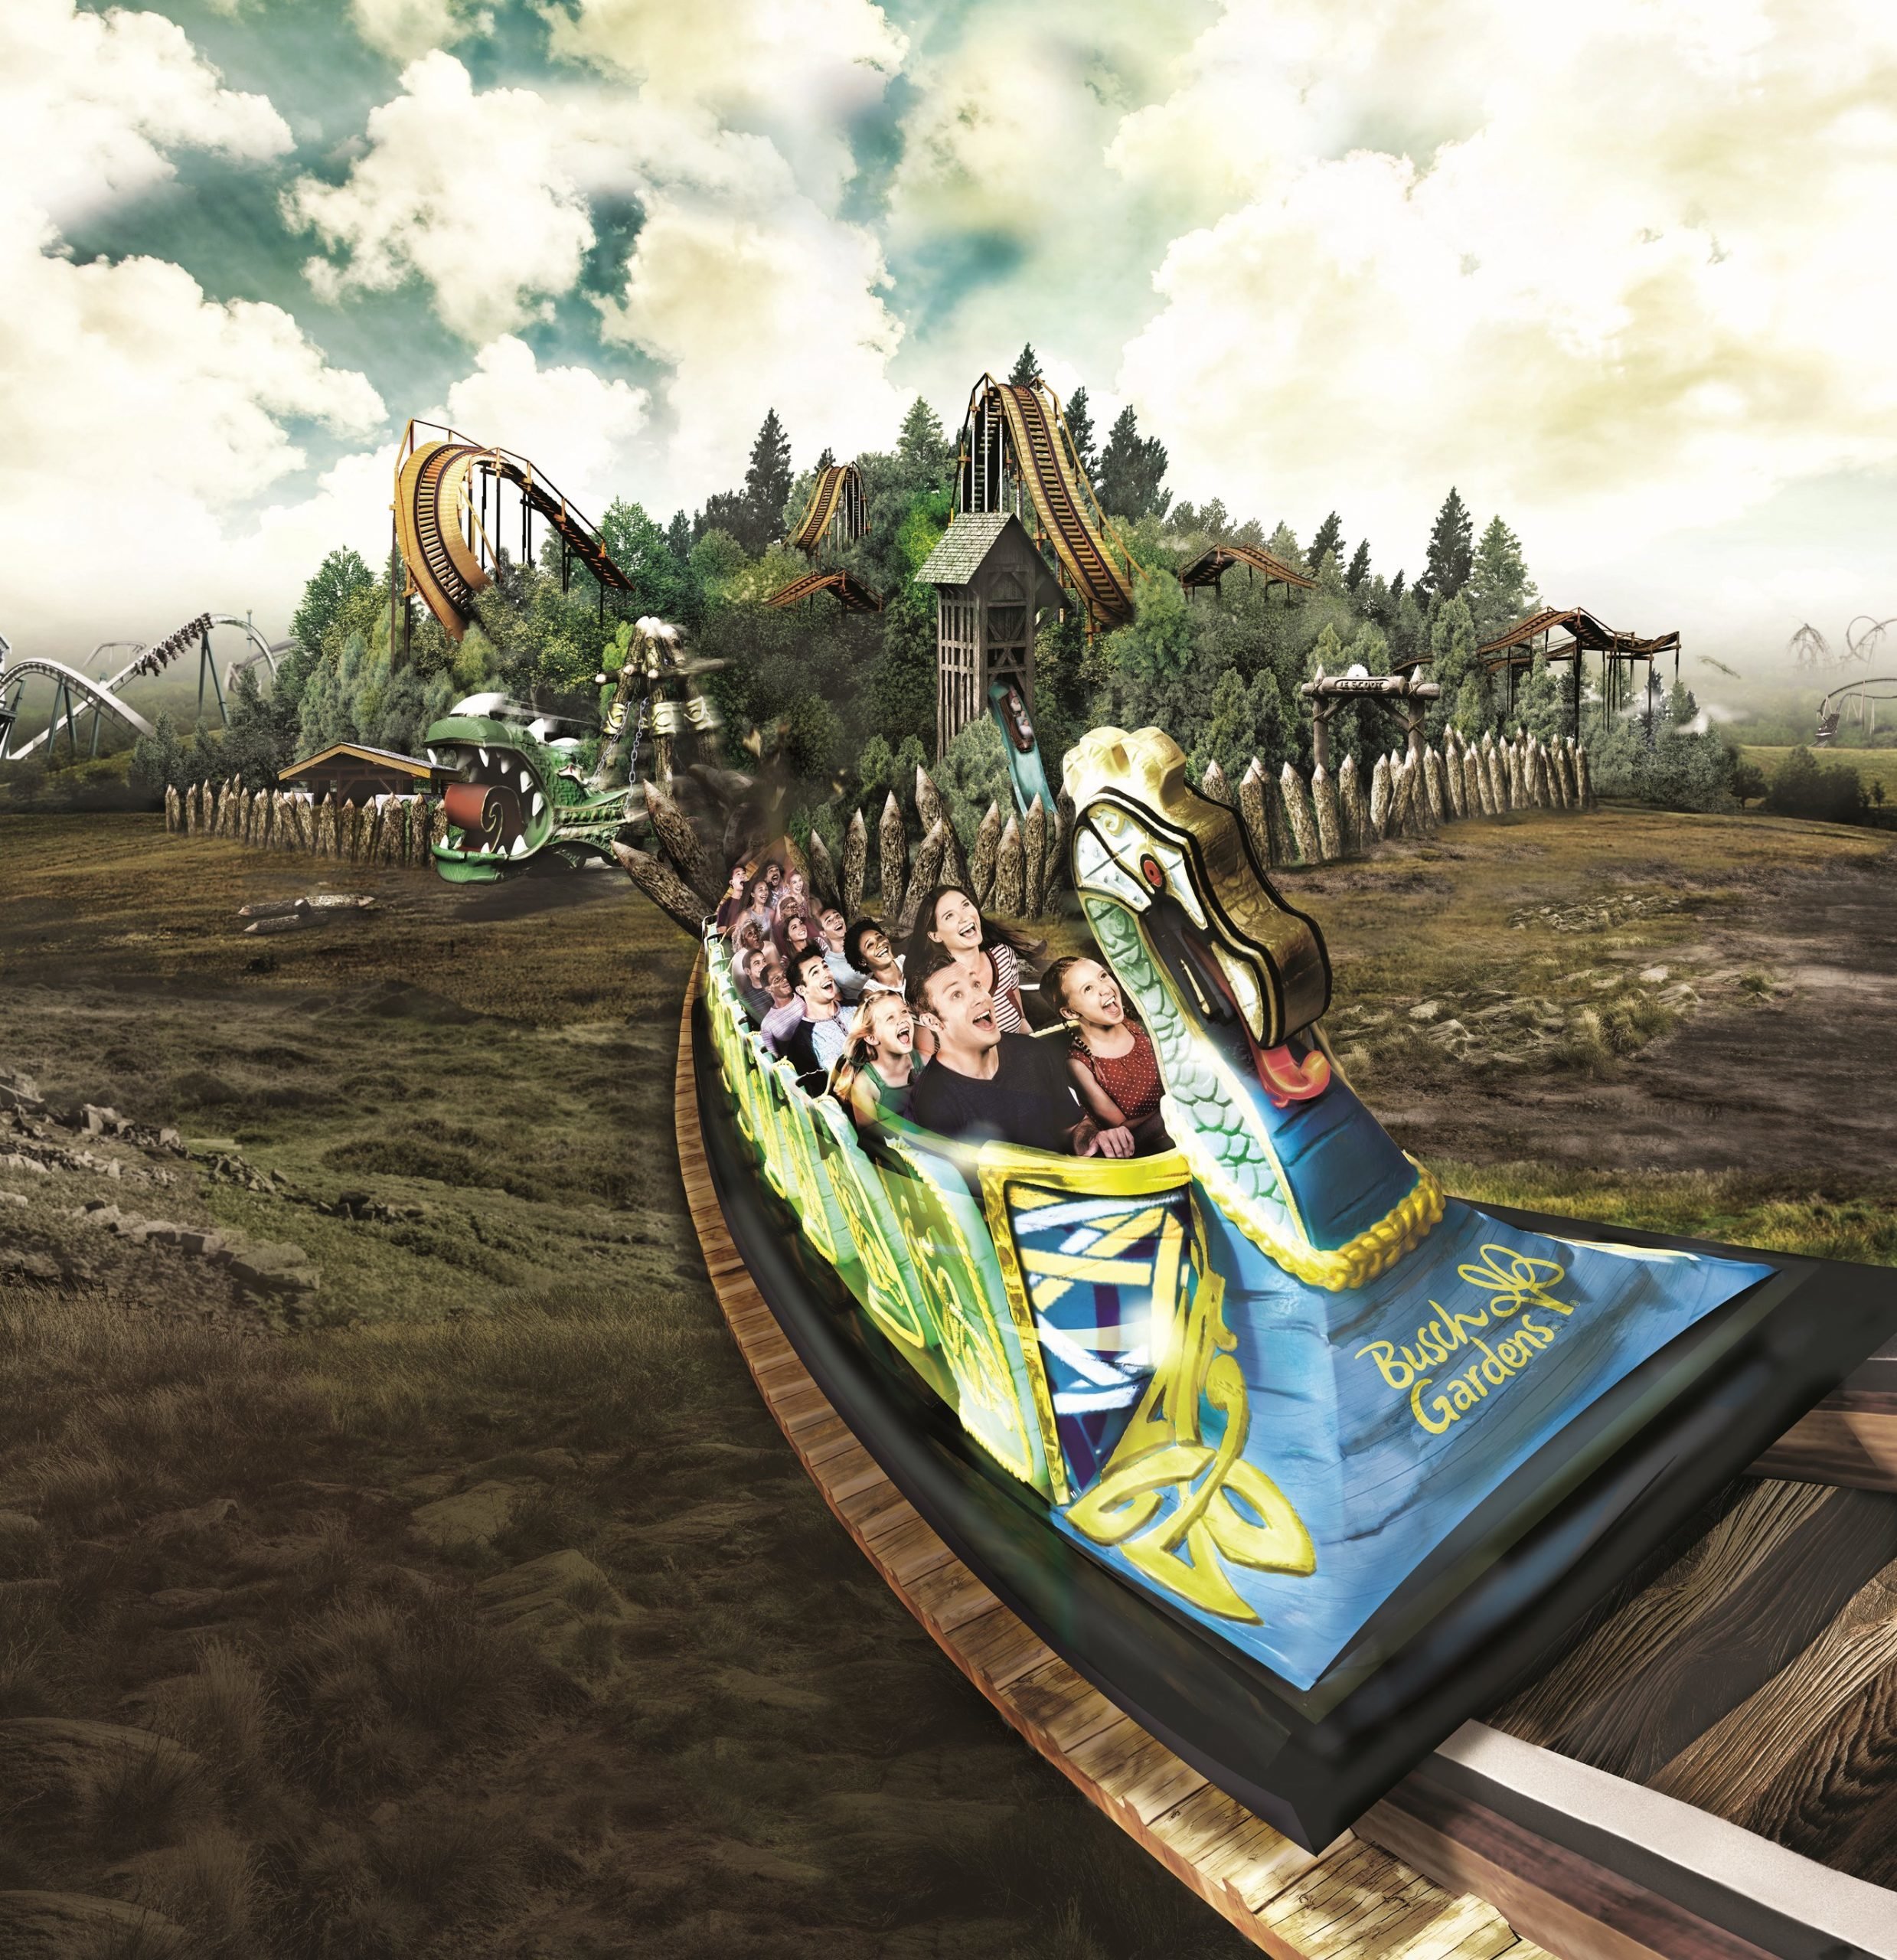 Riders on a wooden roller coaster with gloomy trees in the background